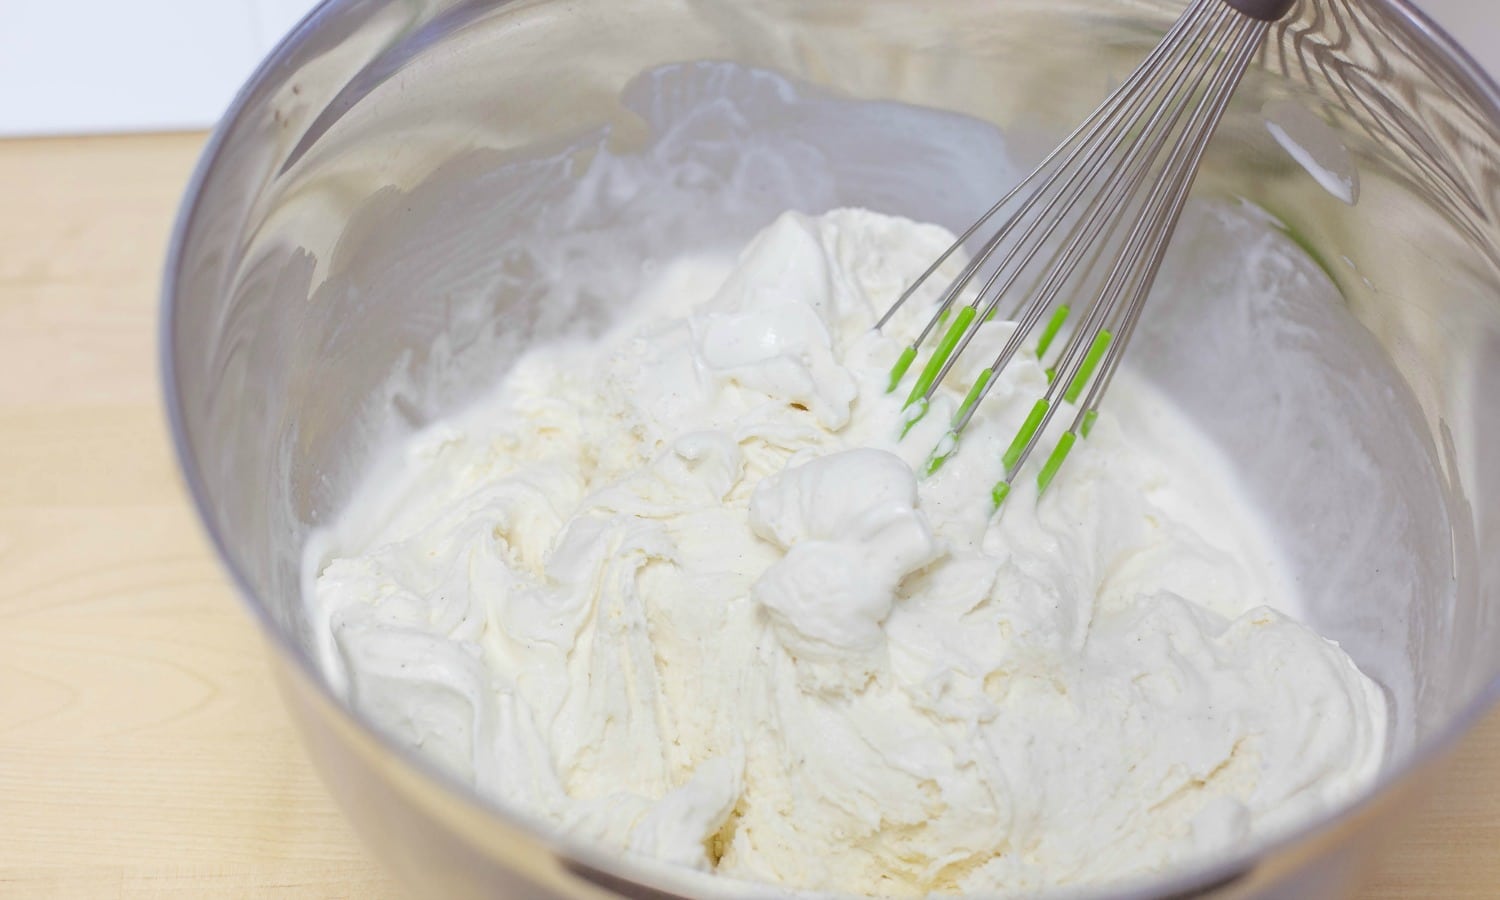 Mix the ice cream into a bowl and until softened.